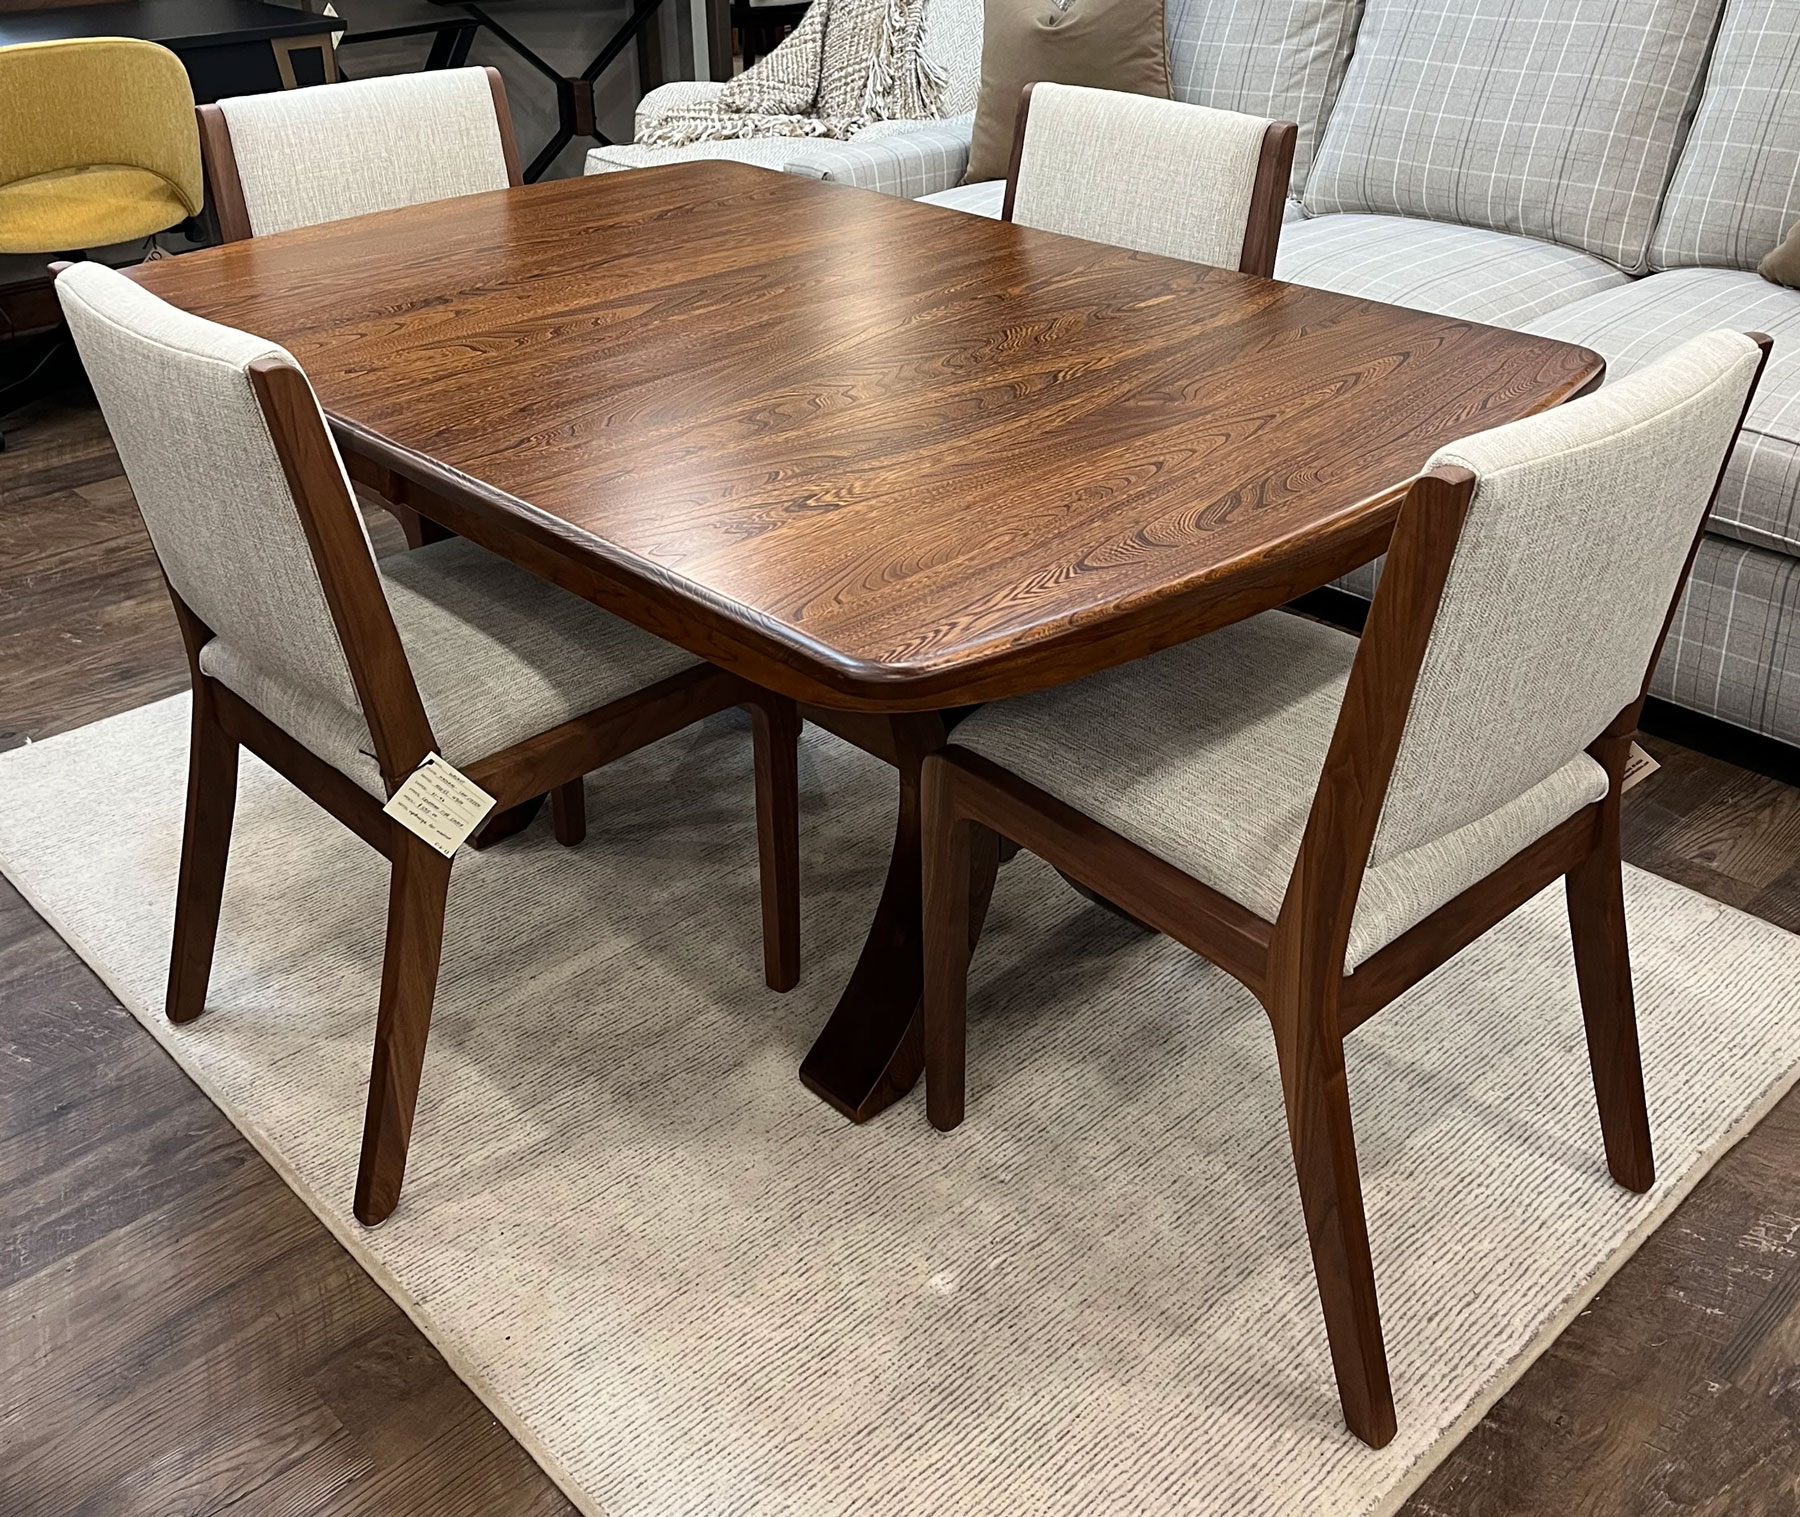 Zehr 42 x 66 Trestle Table with (2) Leaf Extensions and (4) Coleman Side Chairs